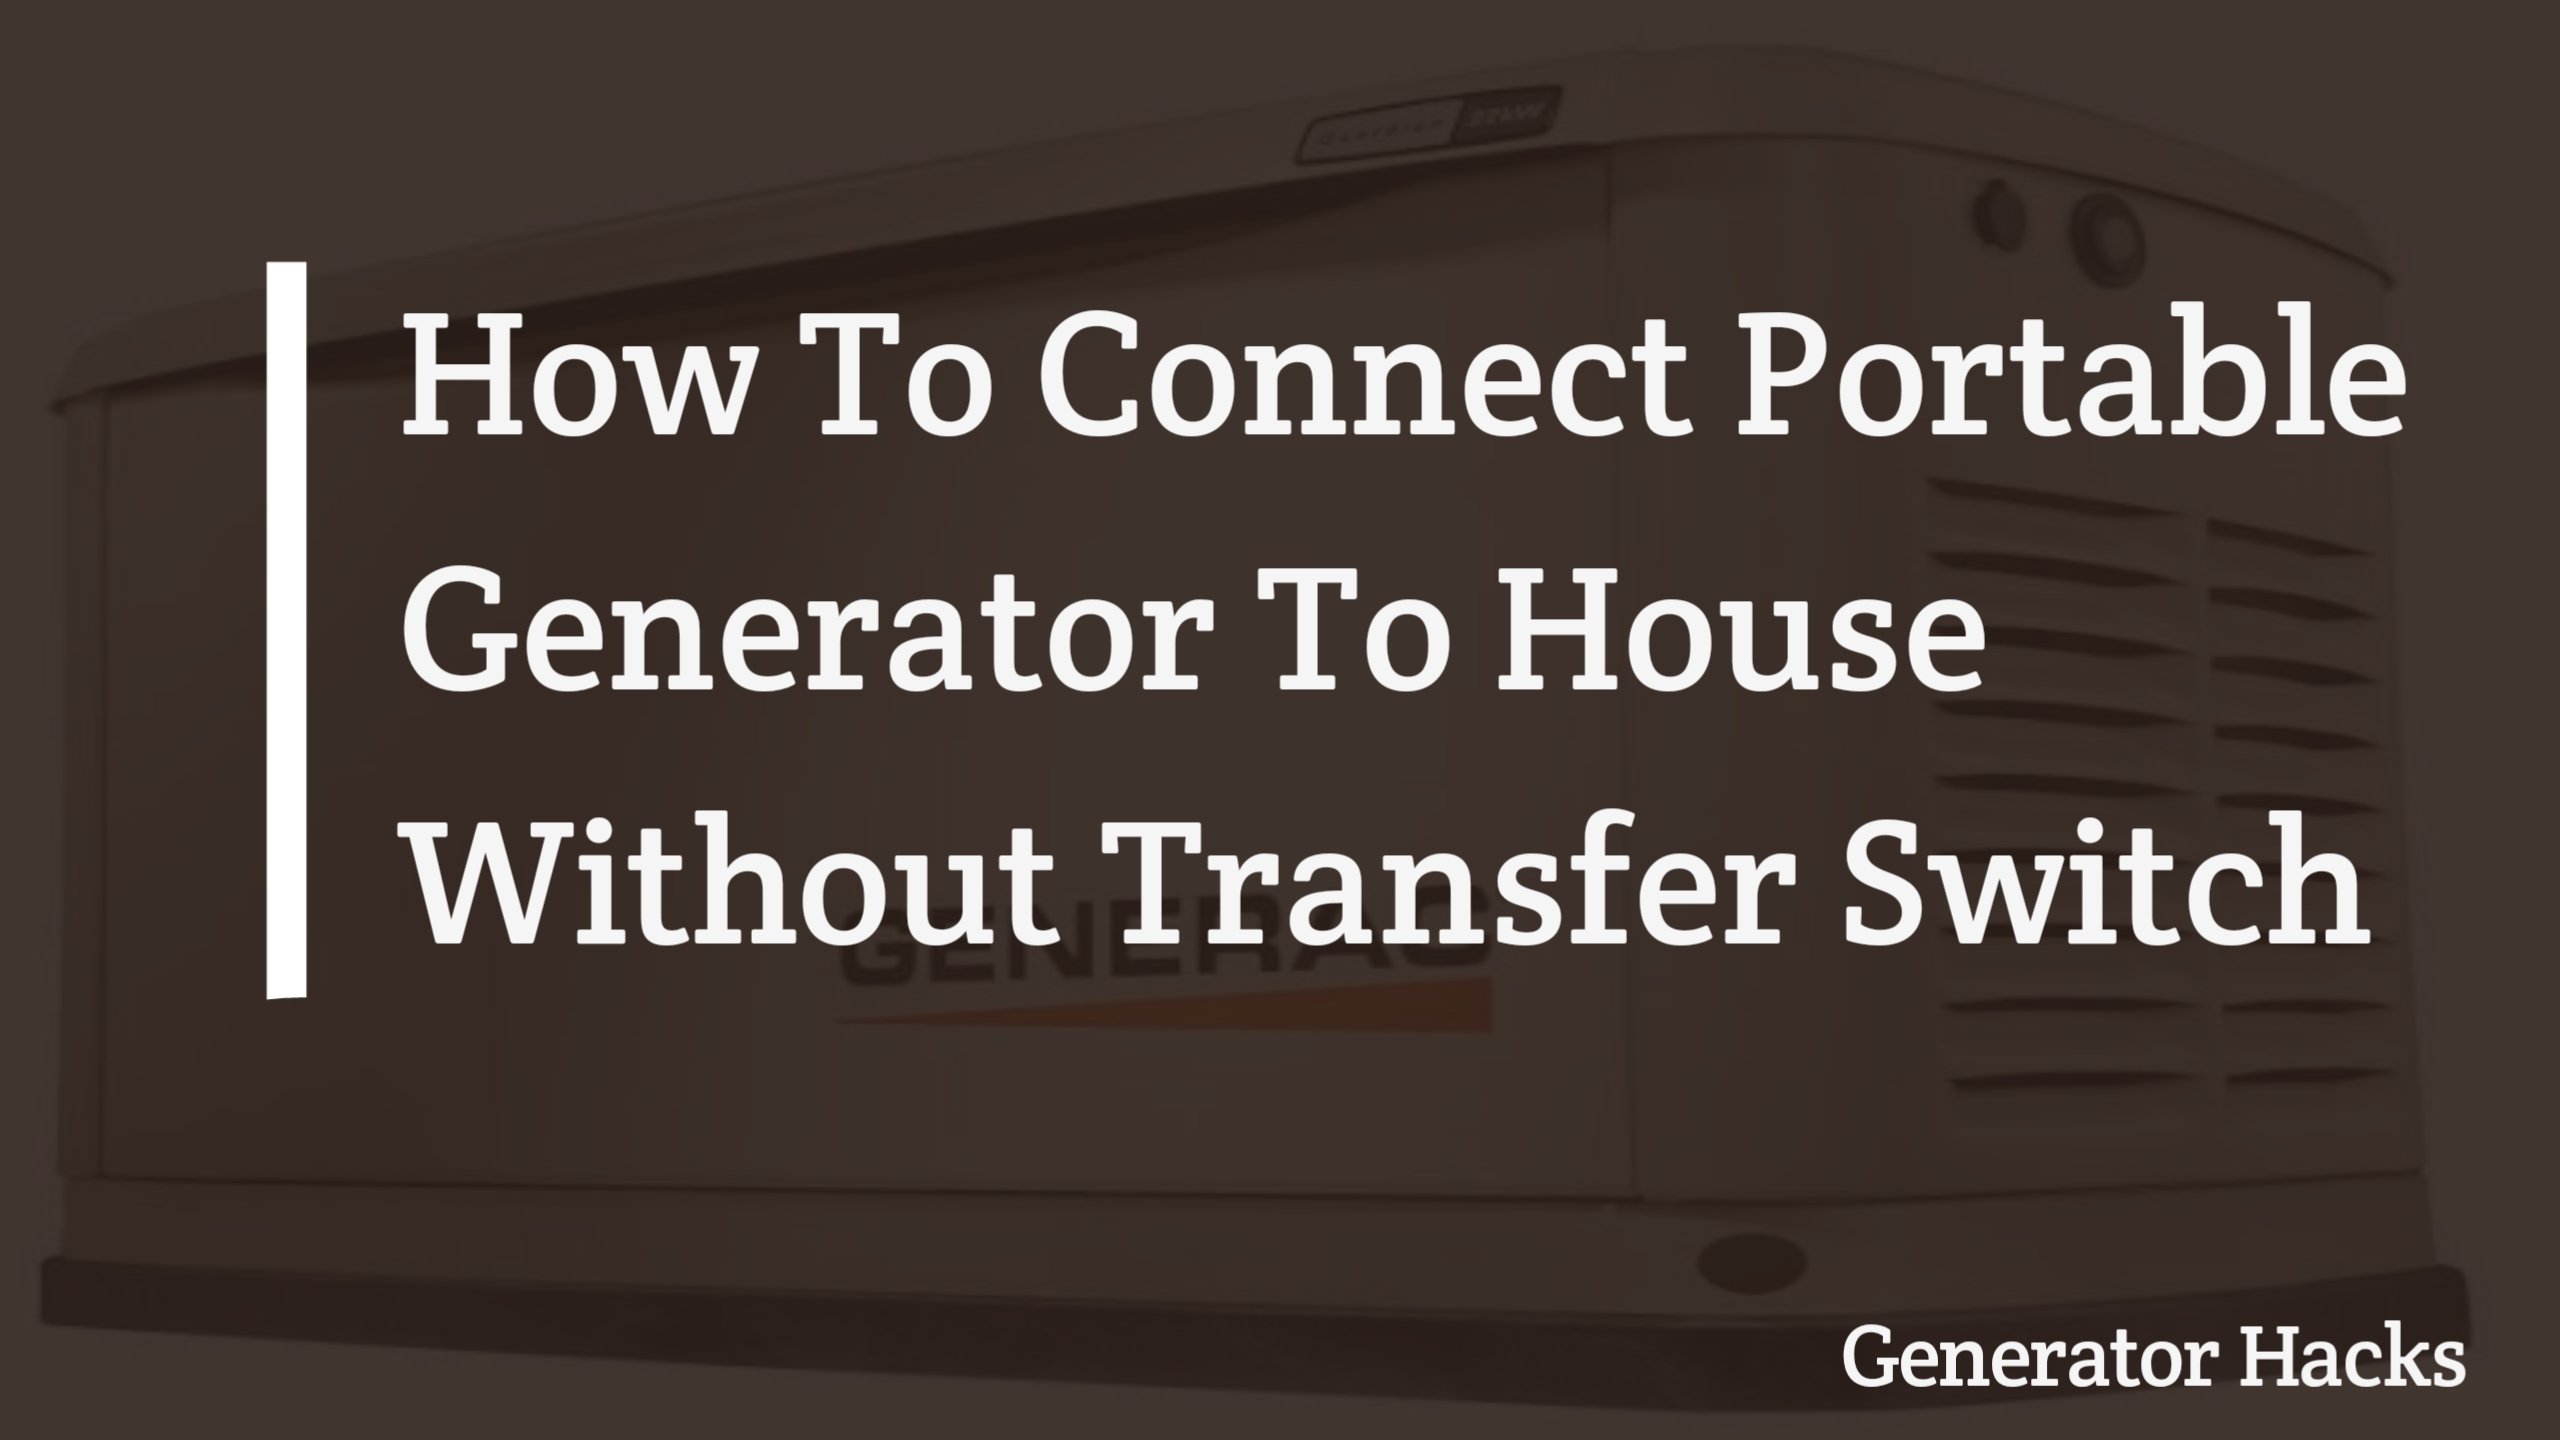 Connect portable generator to house without transfer switch, portable generator, transfer switch,